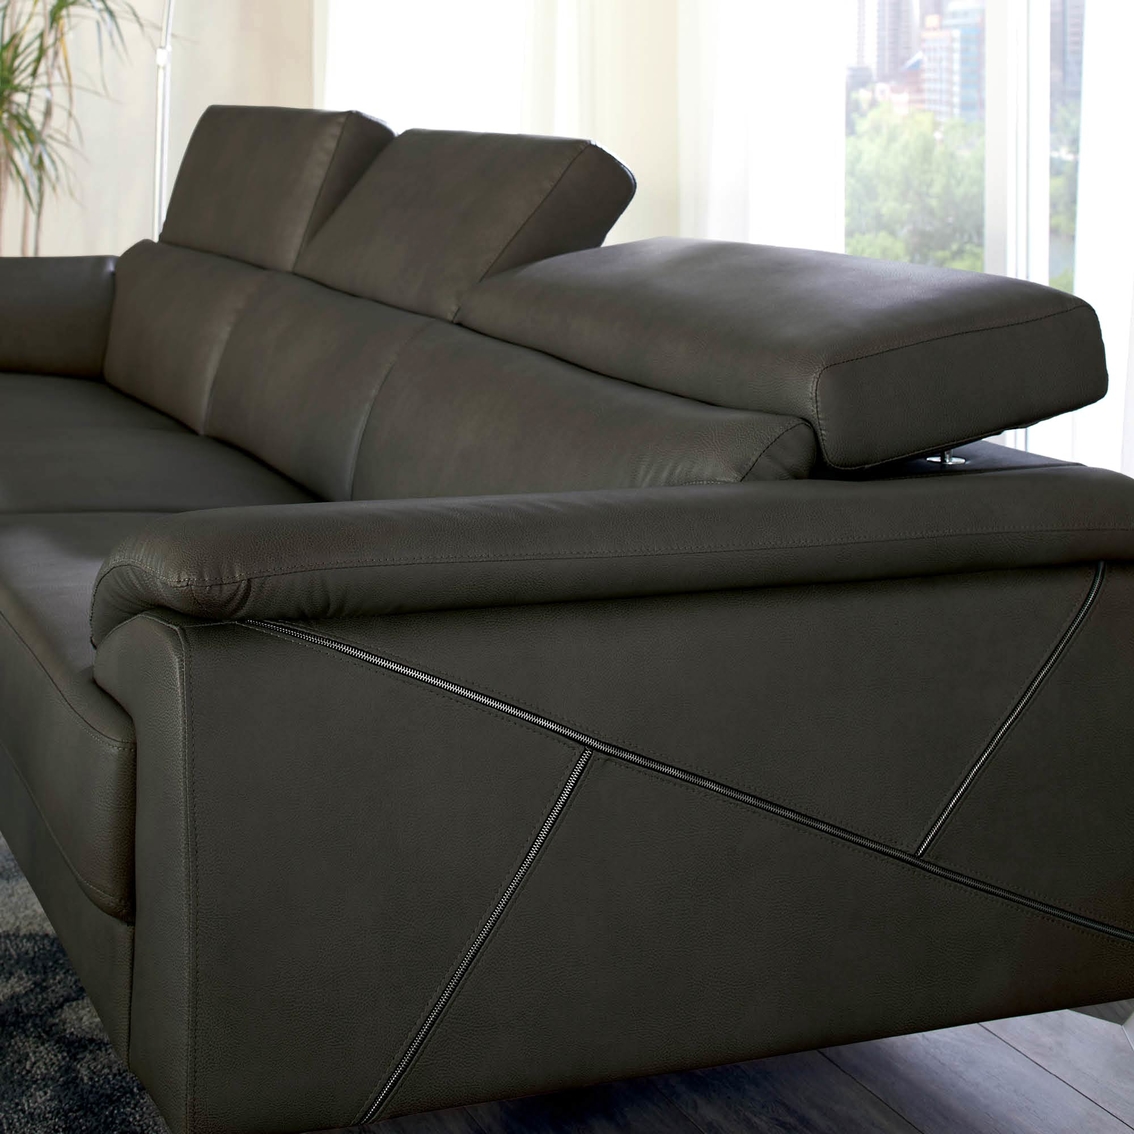 Signature Design by Ashley Tindell 2 Pc. LAF Corner Chaise Sectional - Image 2 of 2